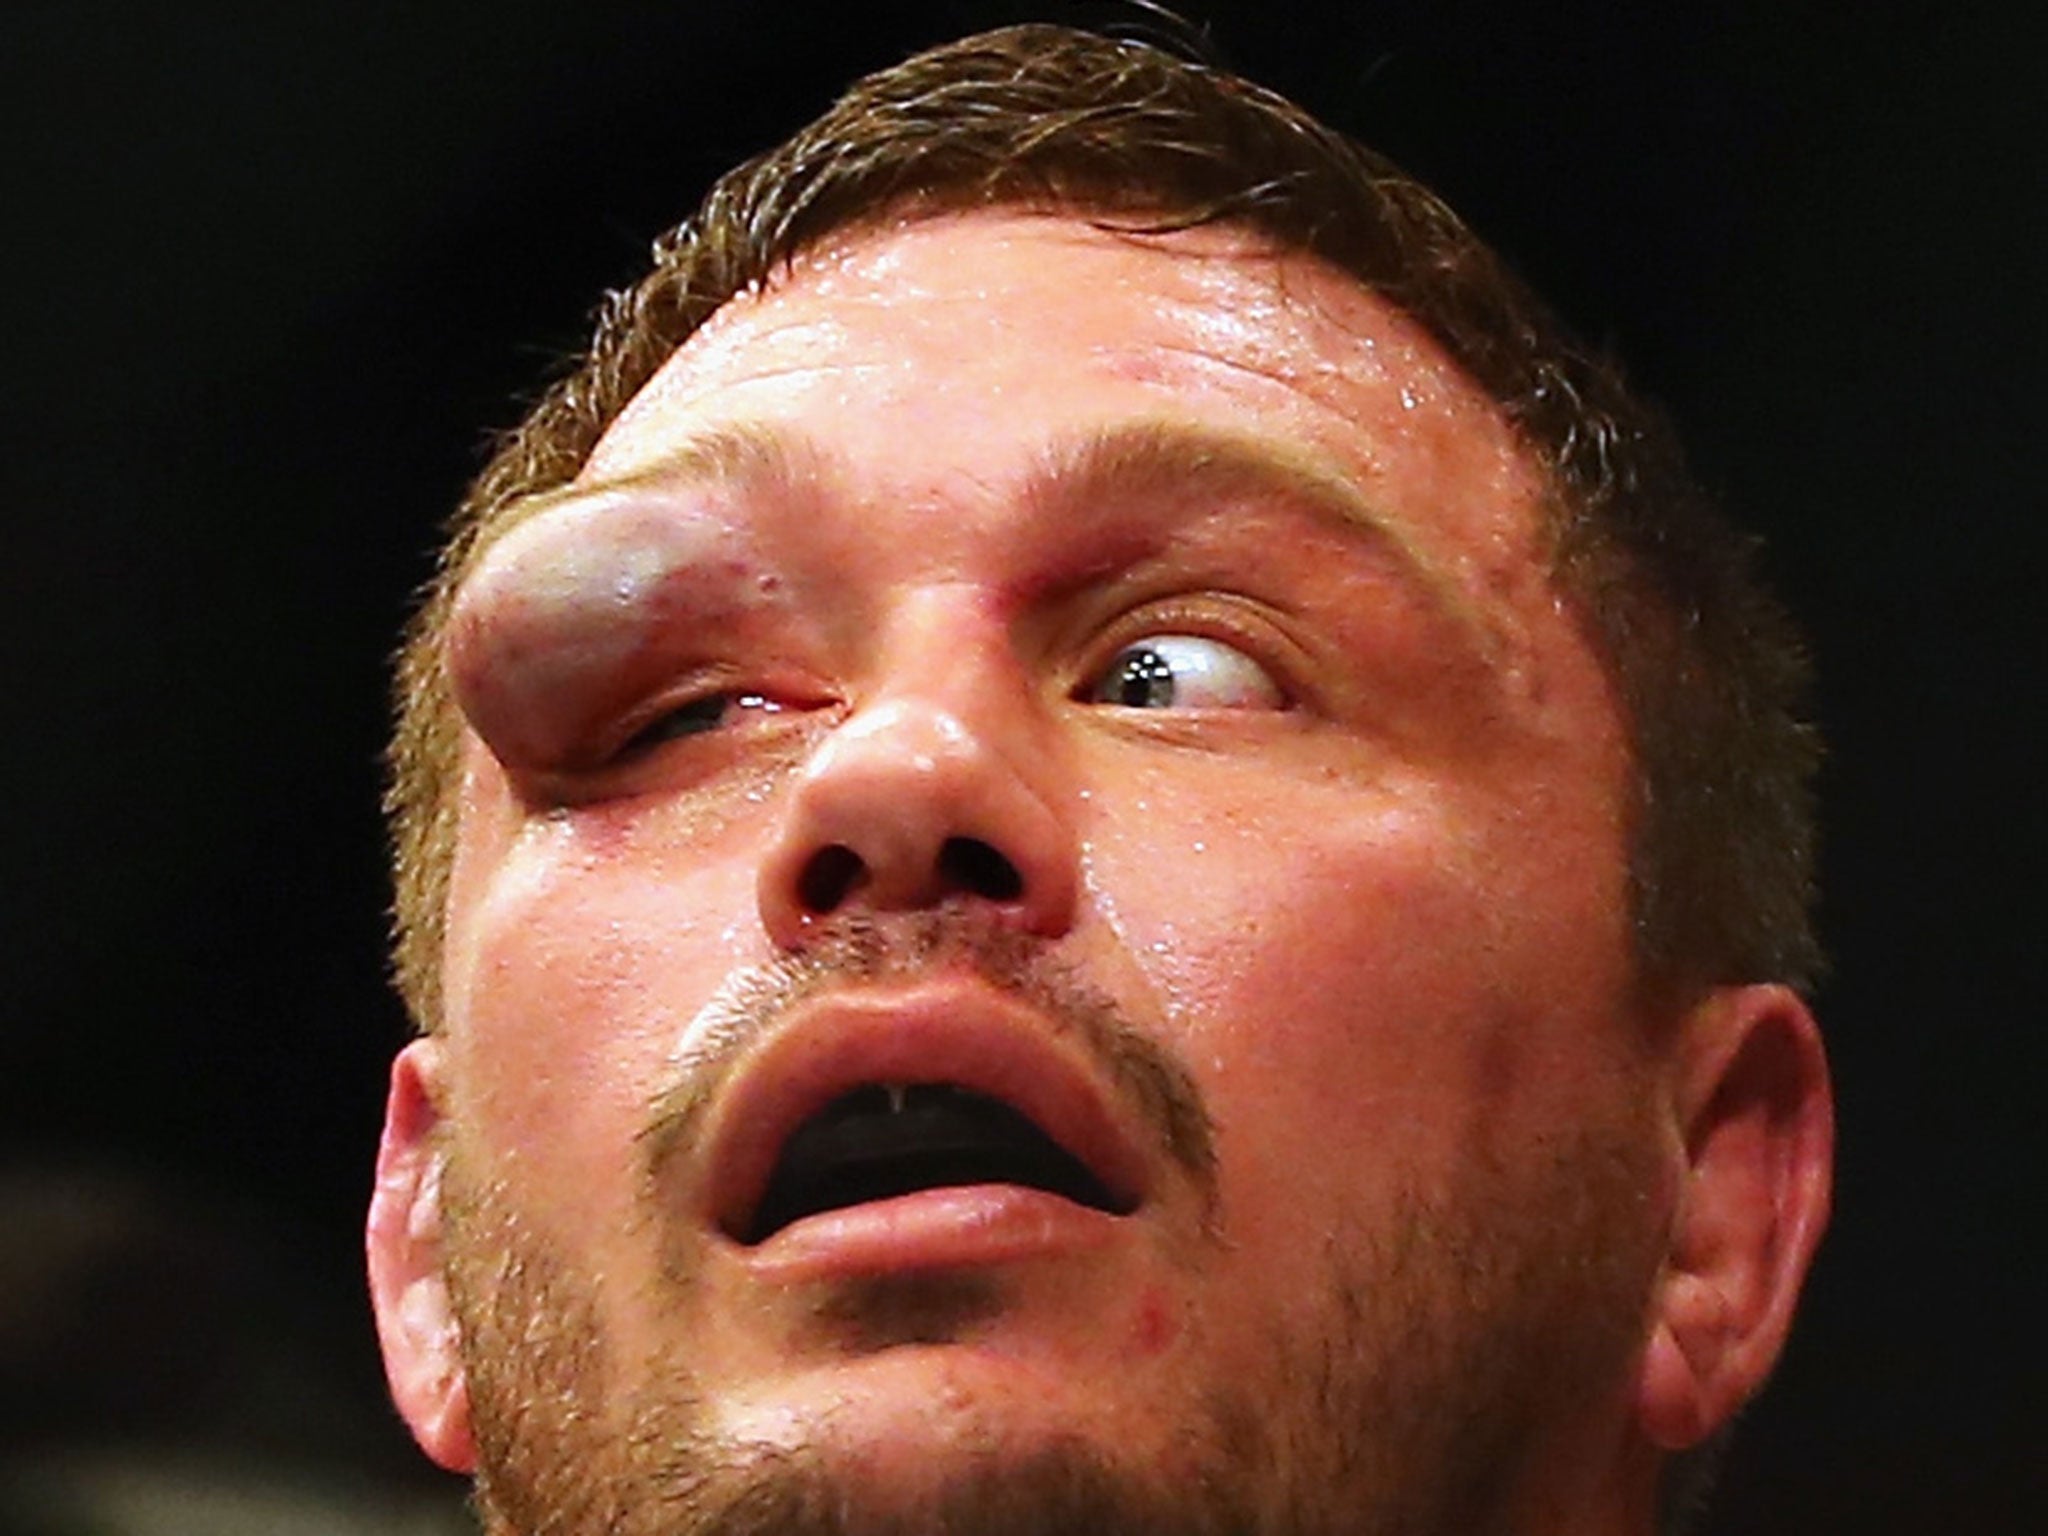 &#13;
Mitrione is left with a badly swollen eye after his loss to Browne&#13;